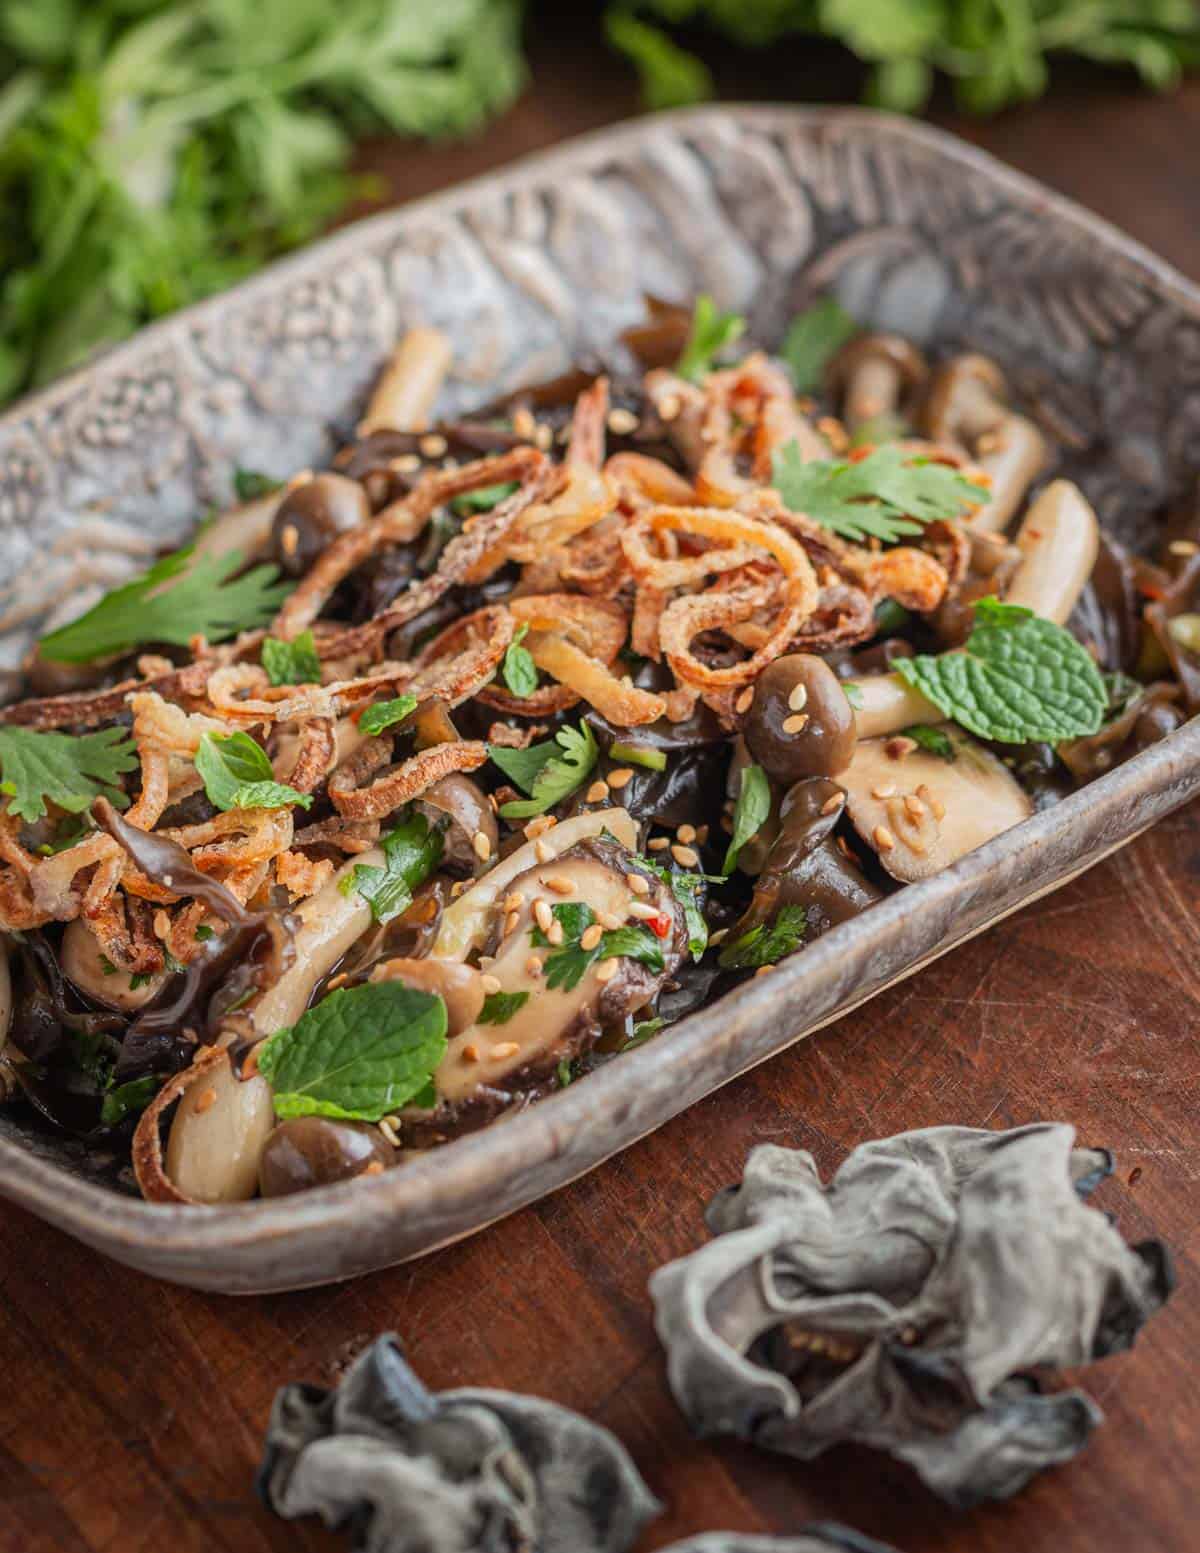 A semi traditional dried wood ear mushroom salad garnished with fried shallots and herbs on a ceramic serving dish.